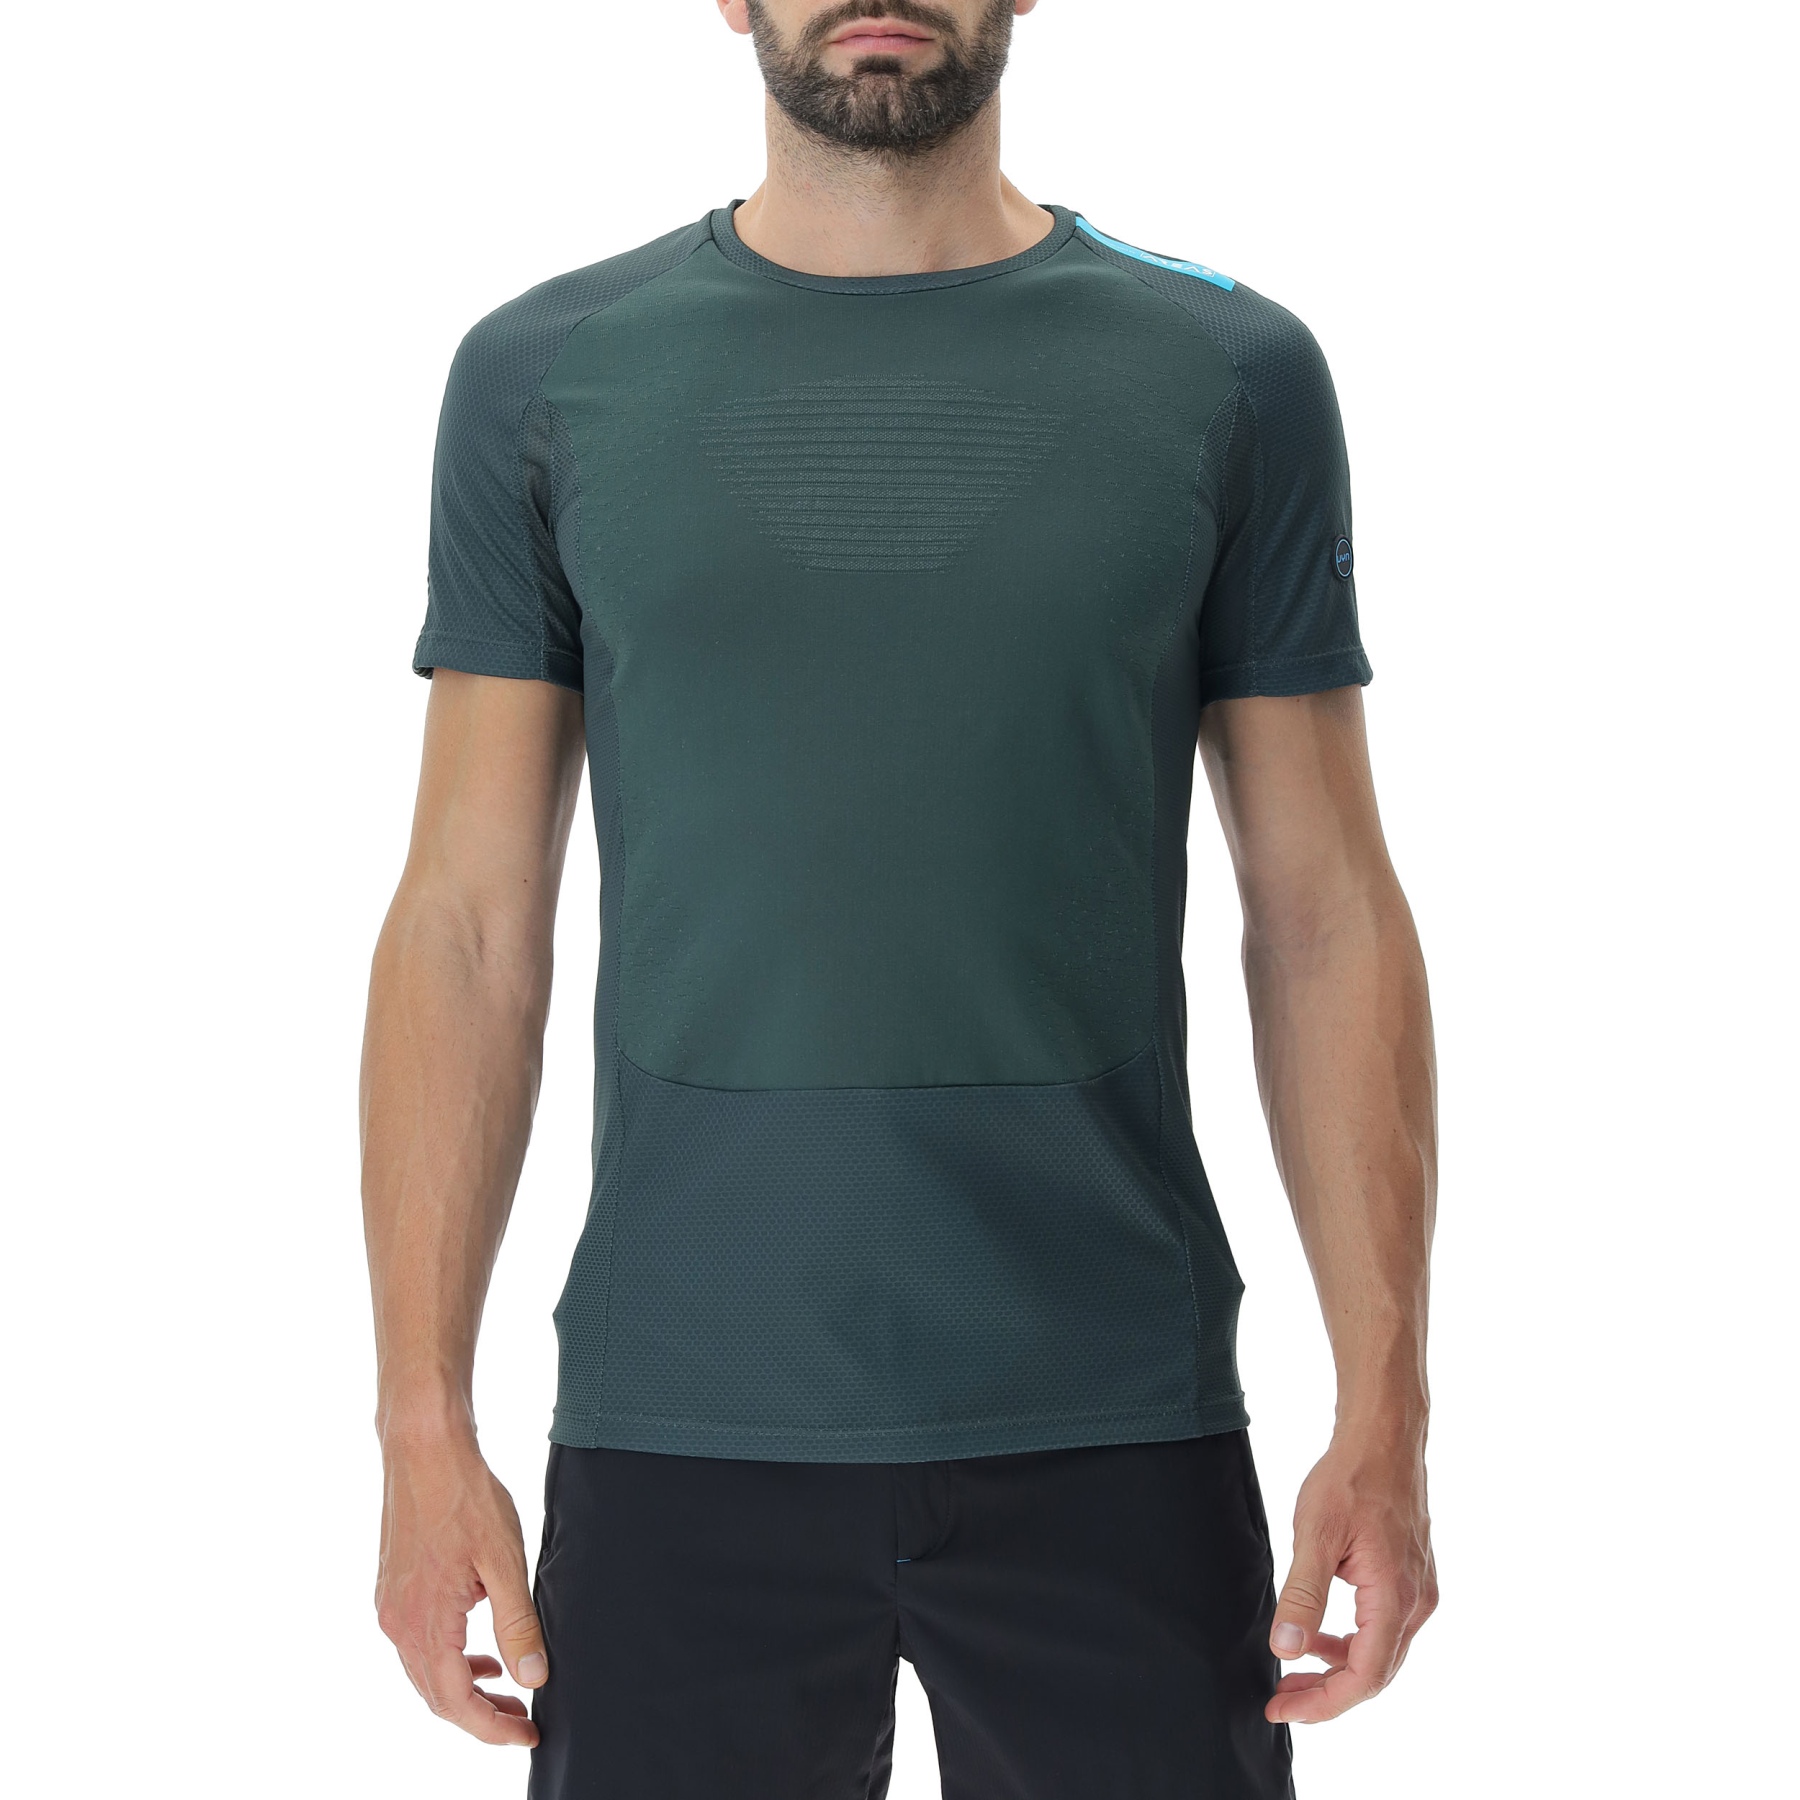 Image of UYN Crossover Short Sleeve Shirt - Deep Forest